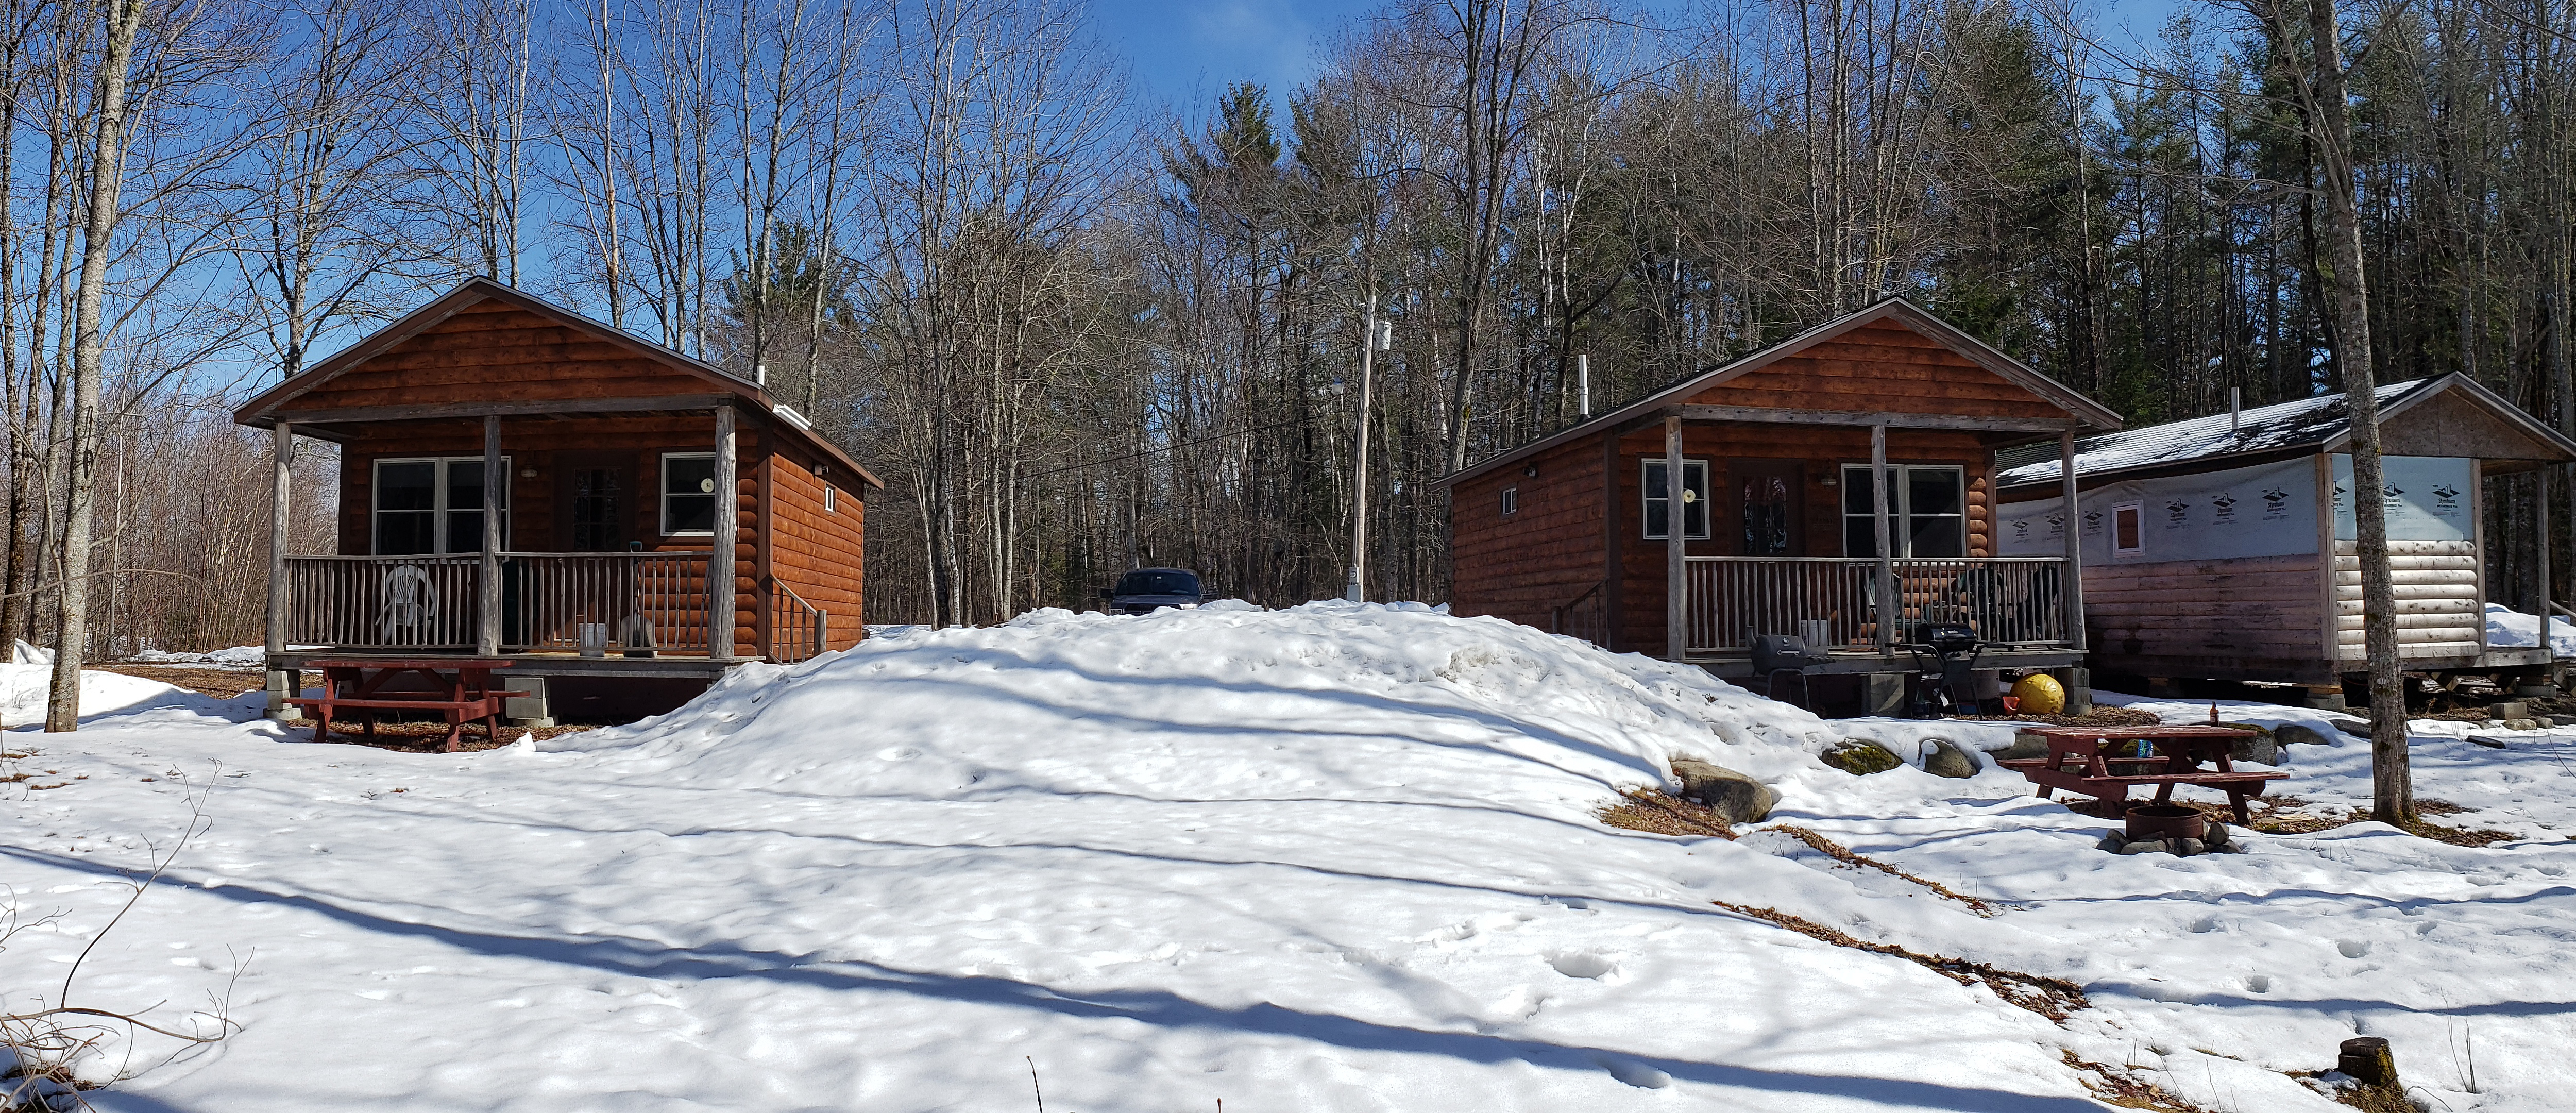 Cabins in the snow